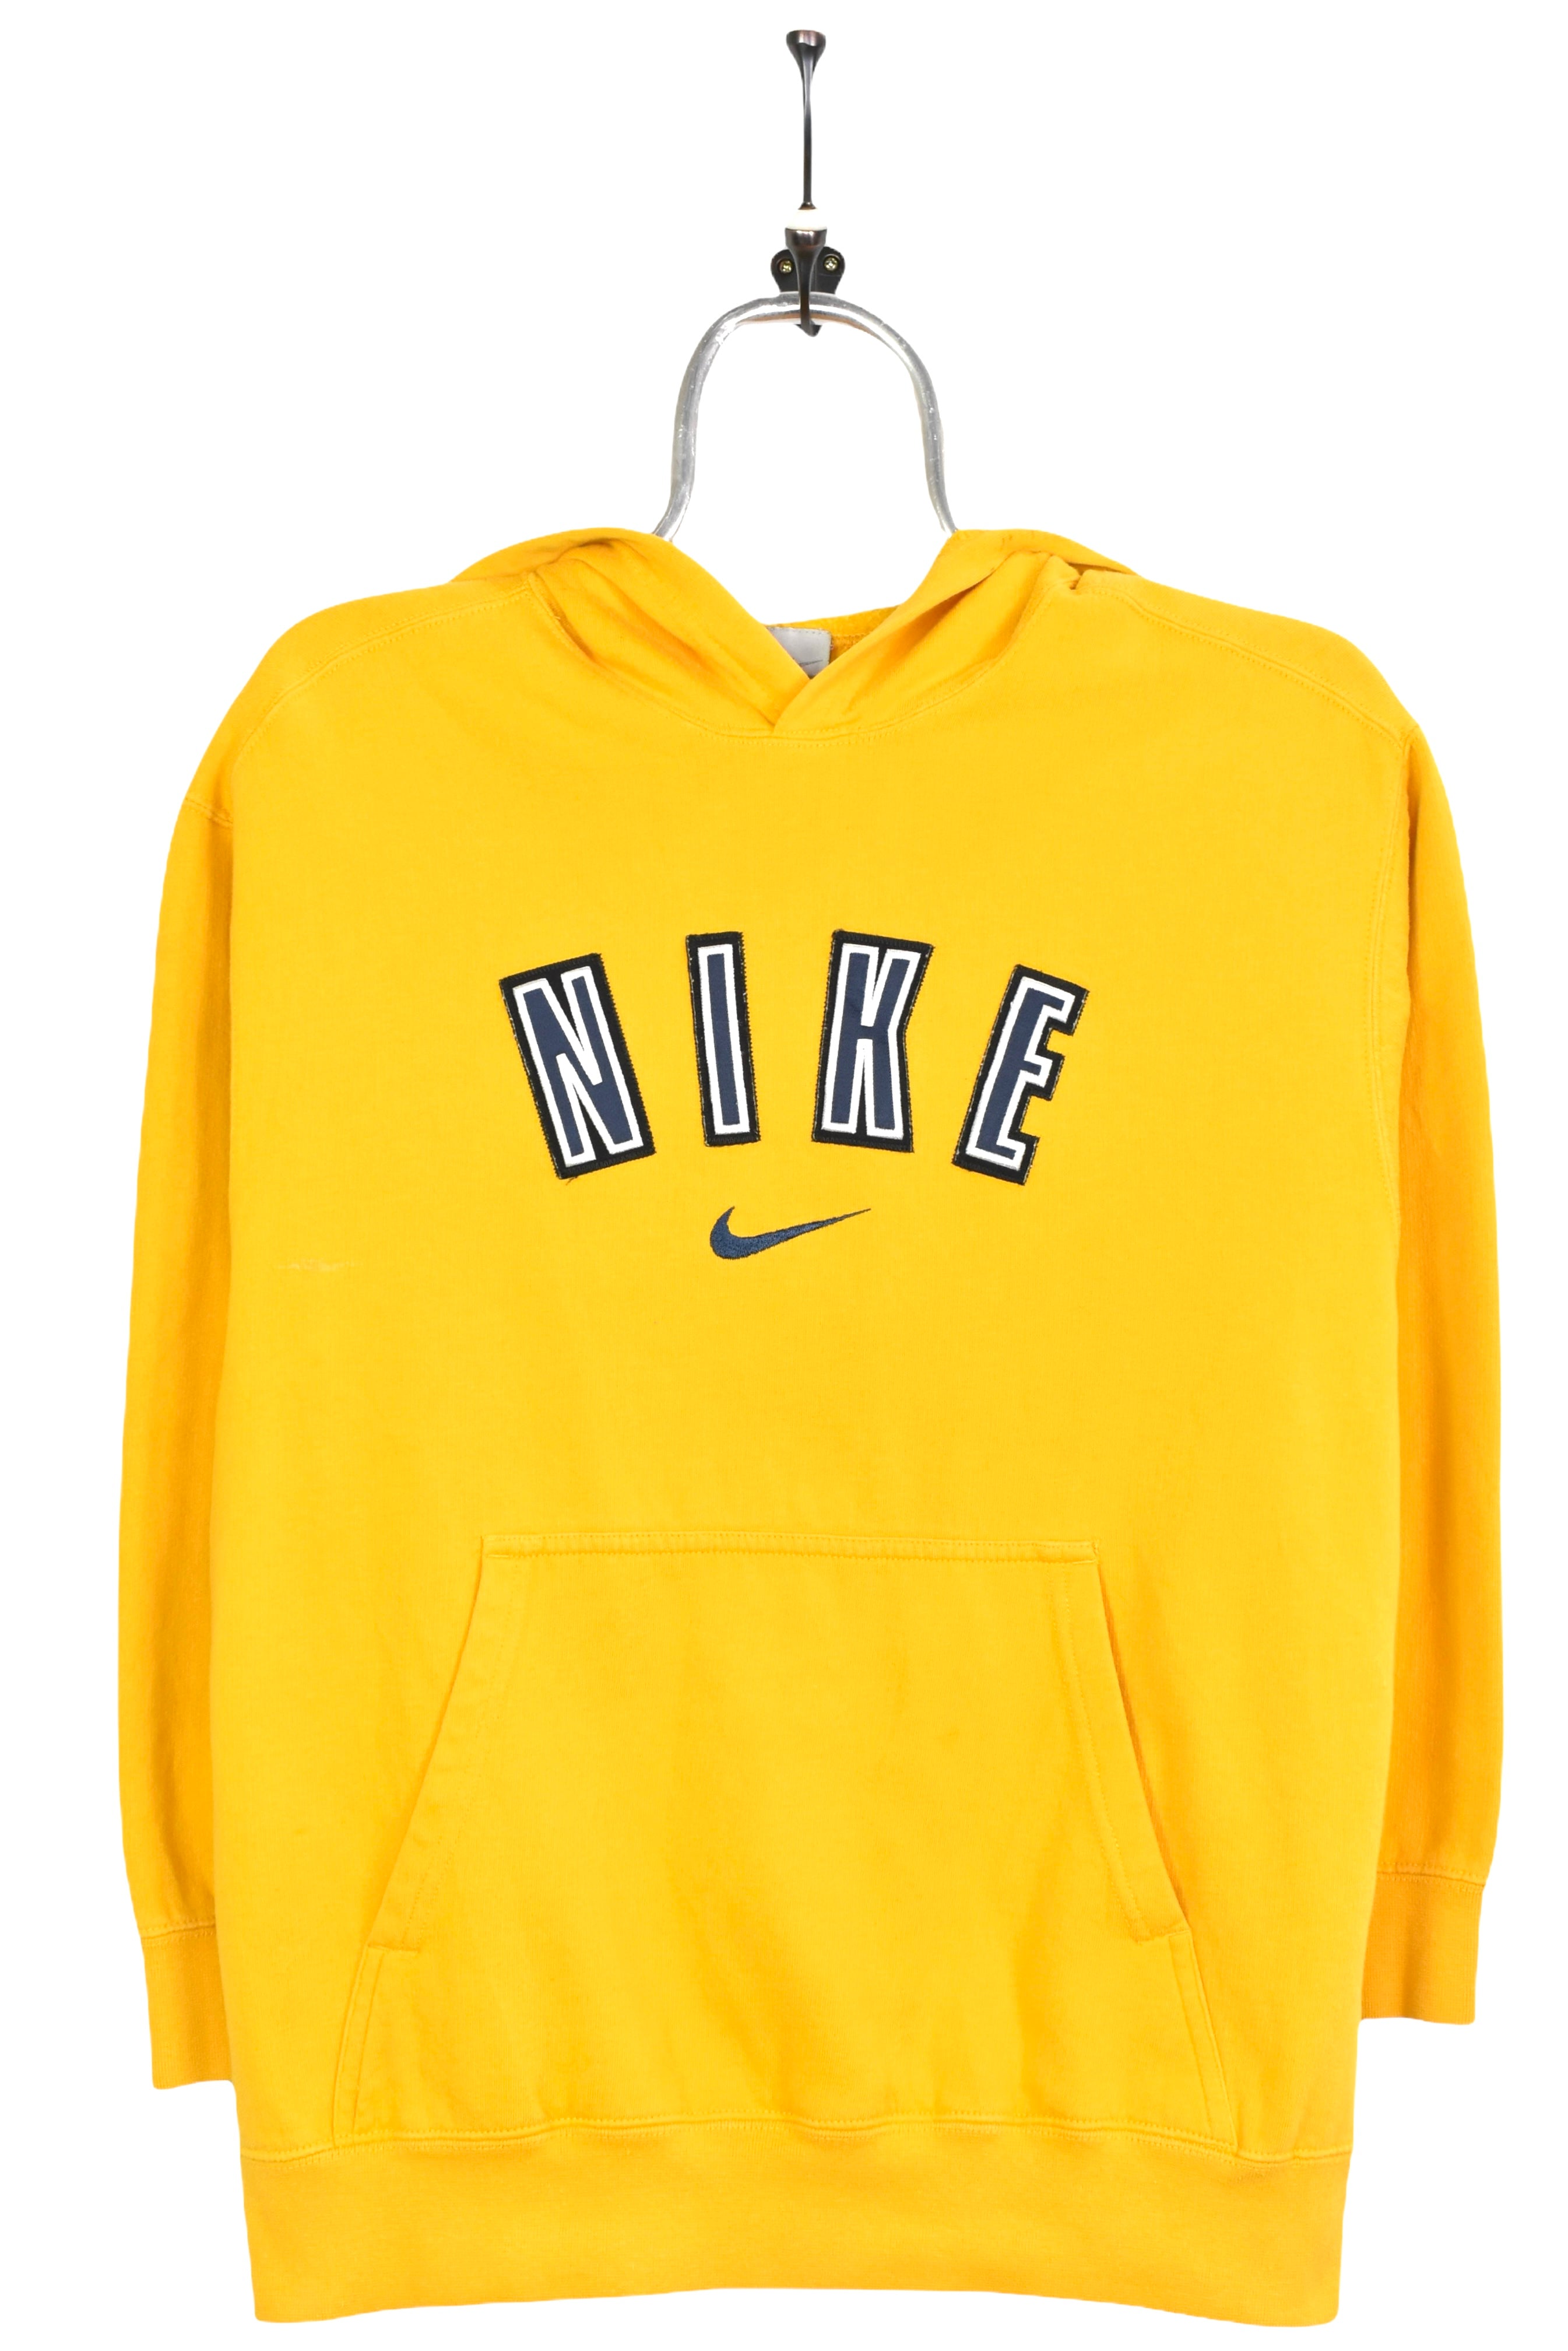 Vintage Nike embroidered yellow hoodie | Small NIKE